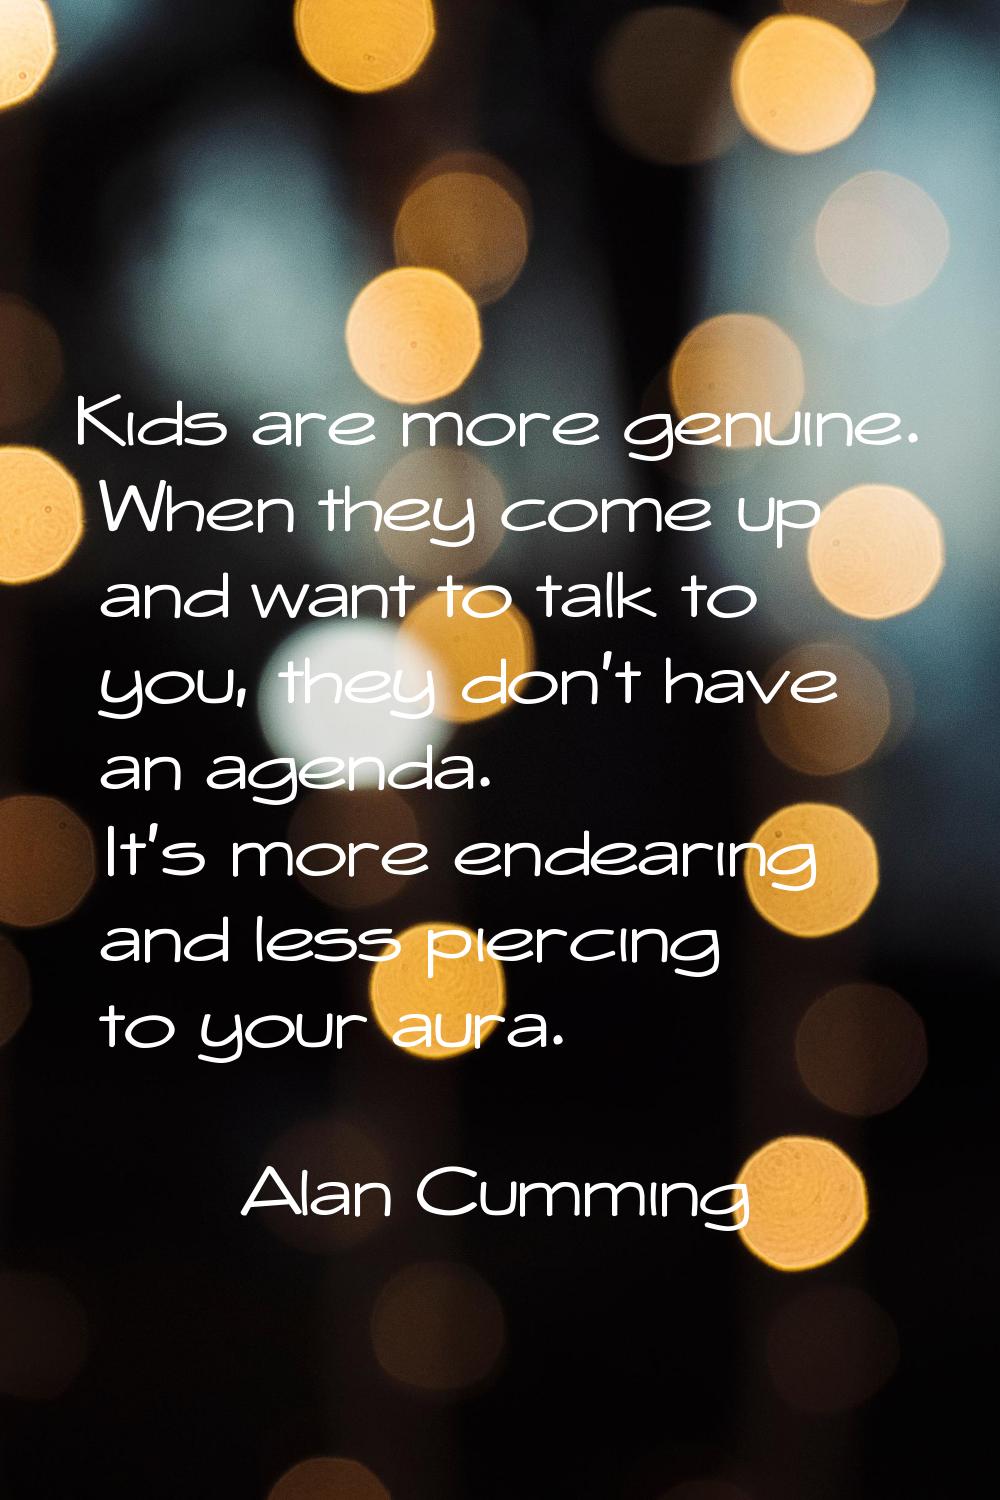 Kids are more genuine. When they come up and want to talk to you, they don't have an agenda. It's m